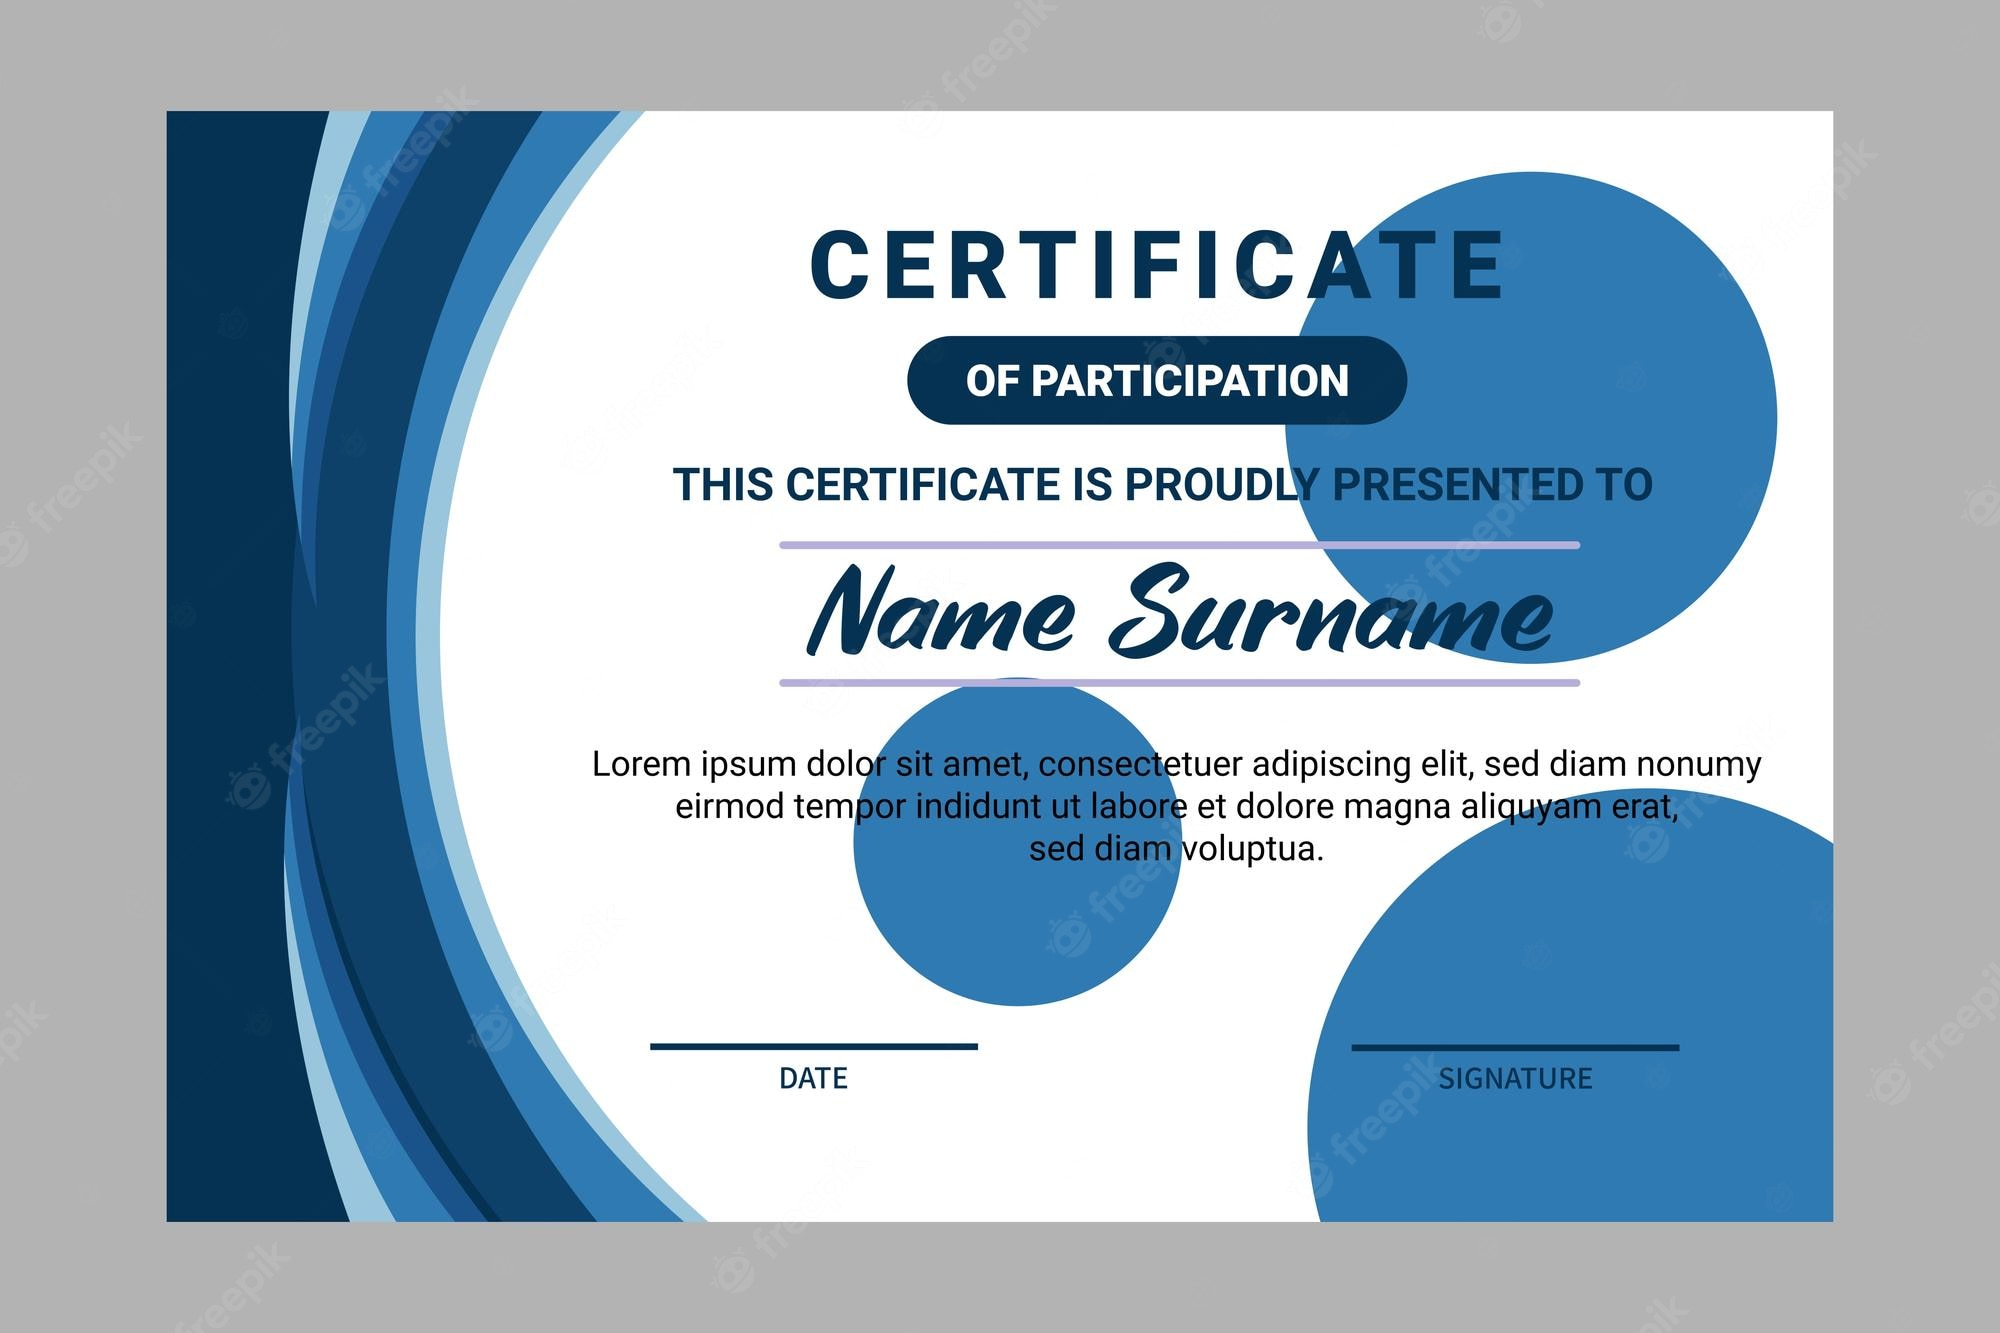 Certificate of participation Vectors & Illustrations for Free  With Free Templates For Certificates Of Participation